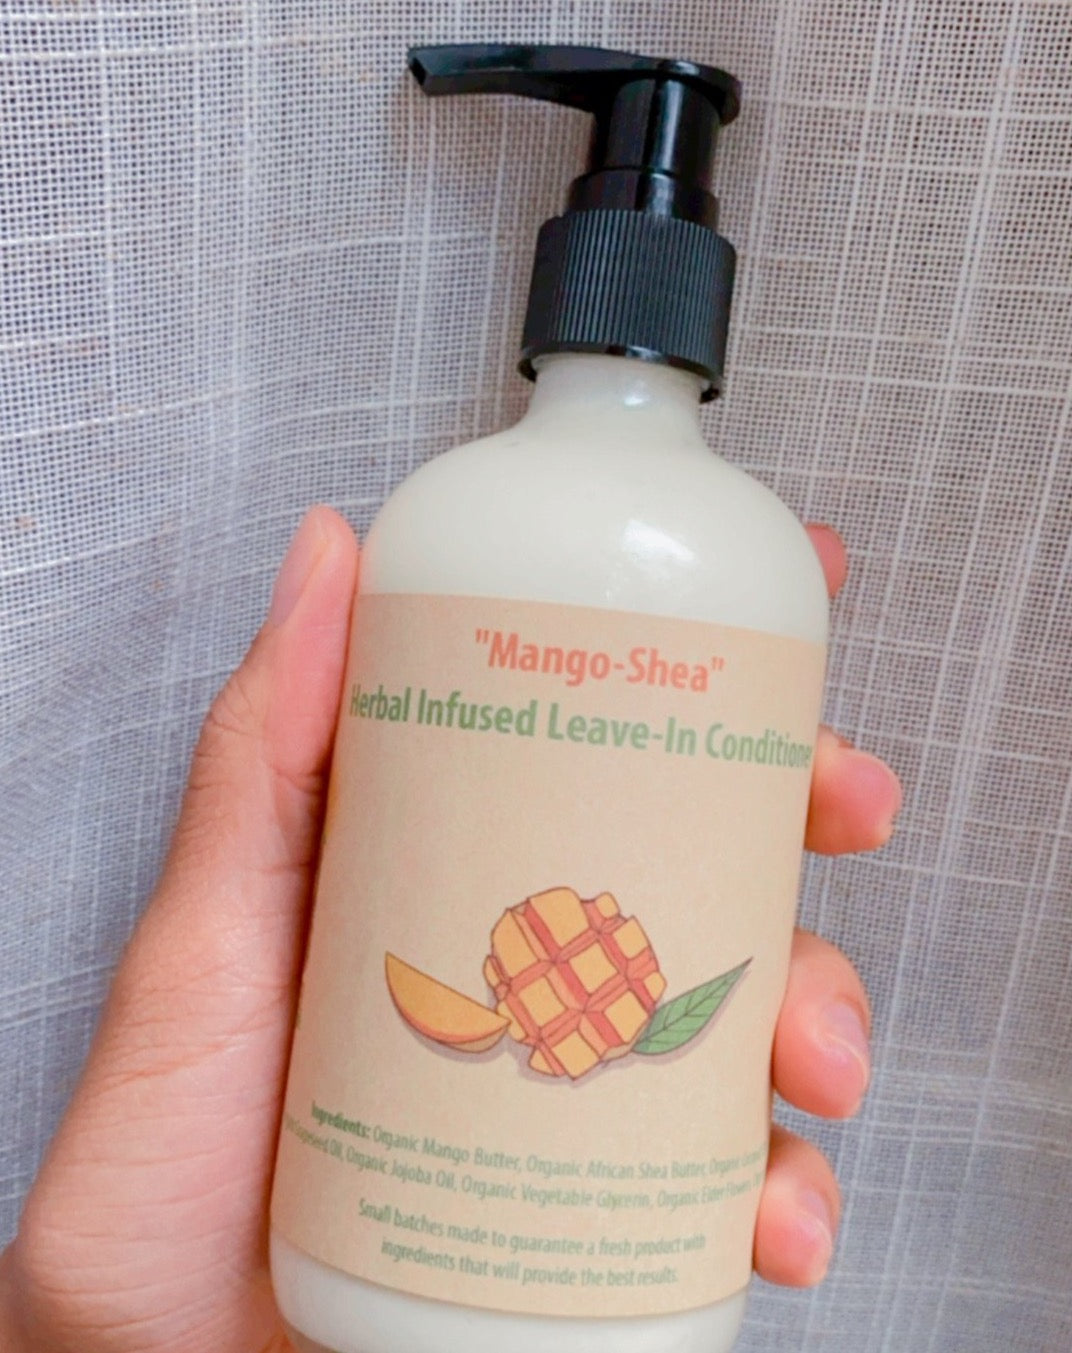 "Mango-Shea" Herbal Infused Leave-In Conditioner